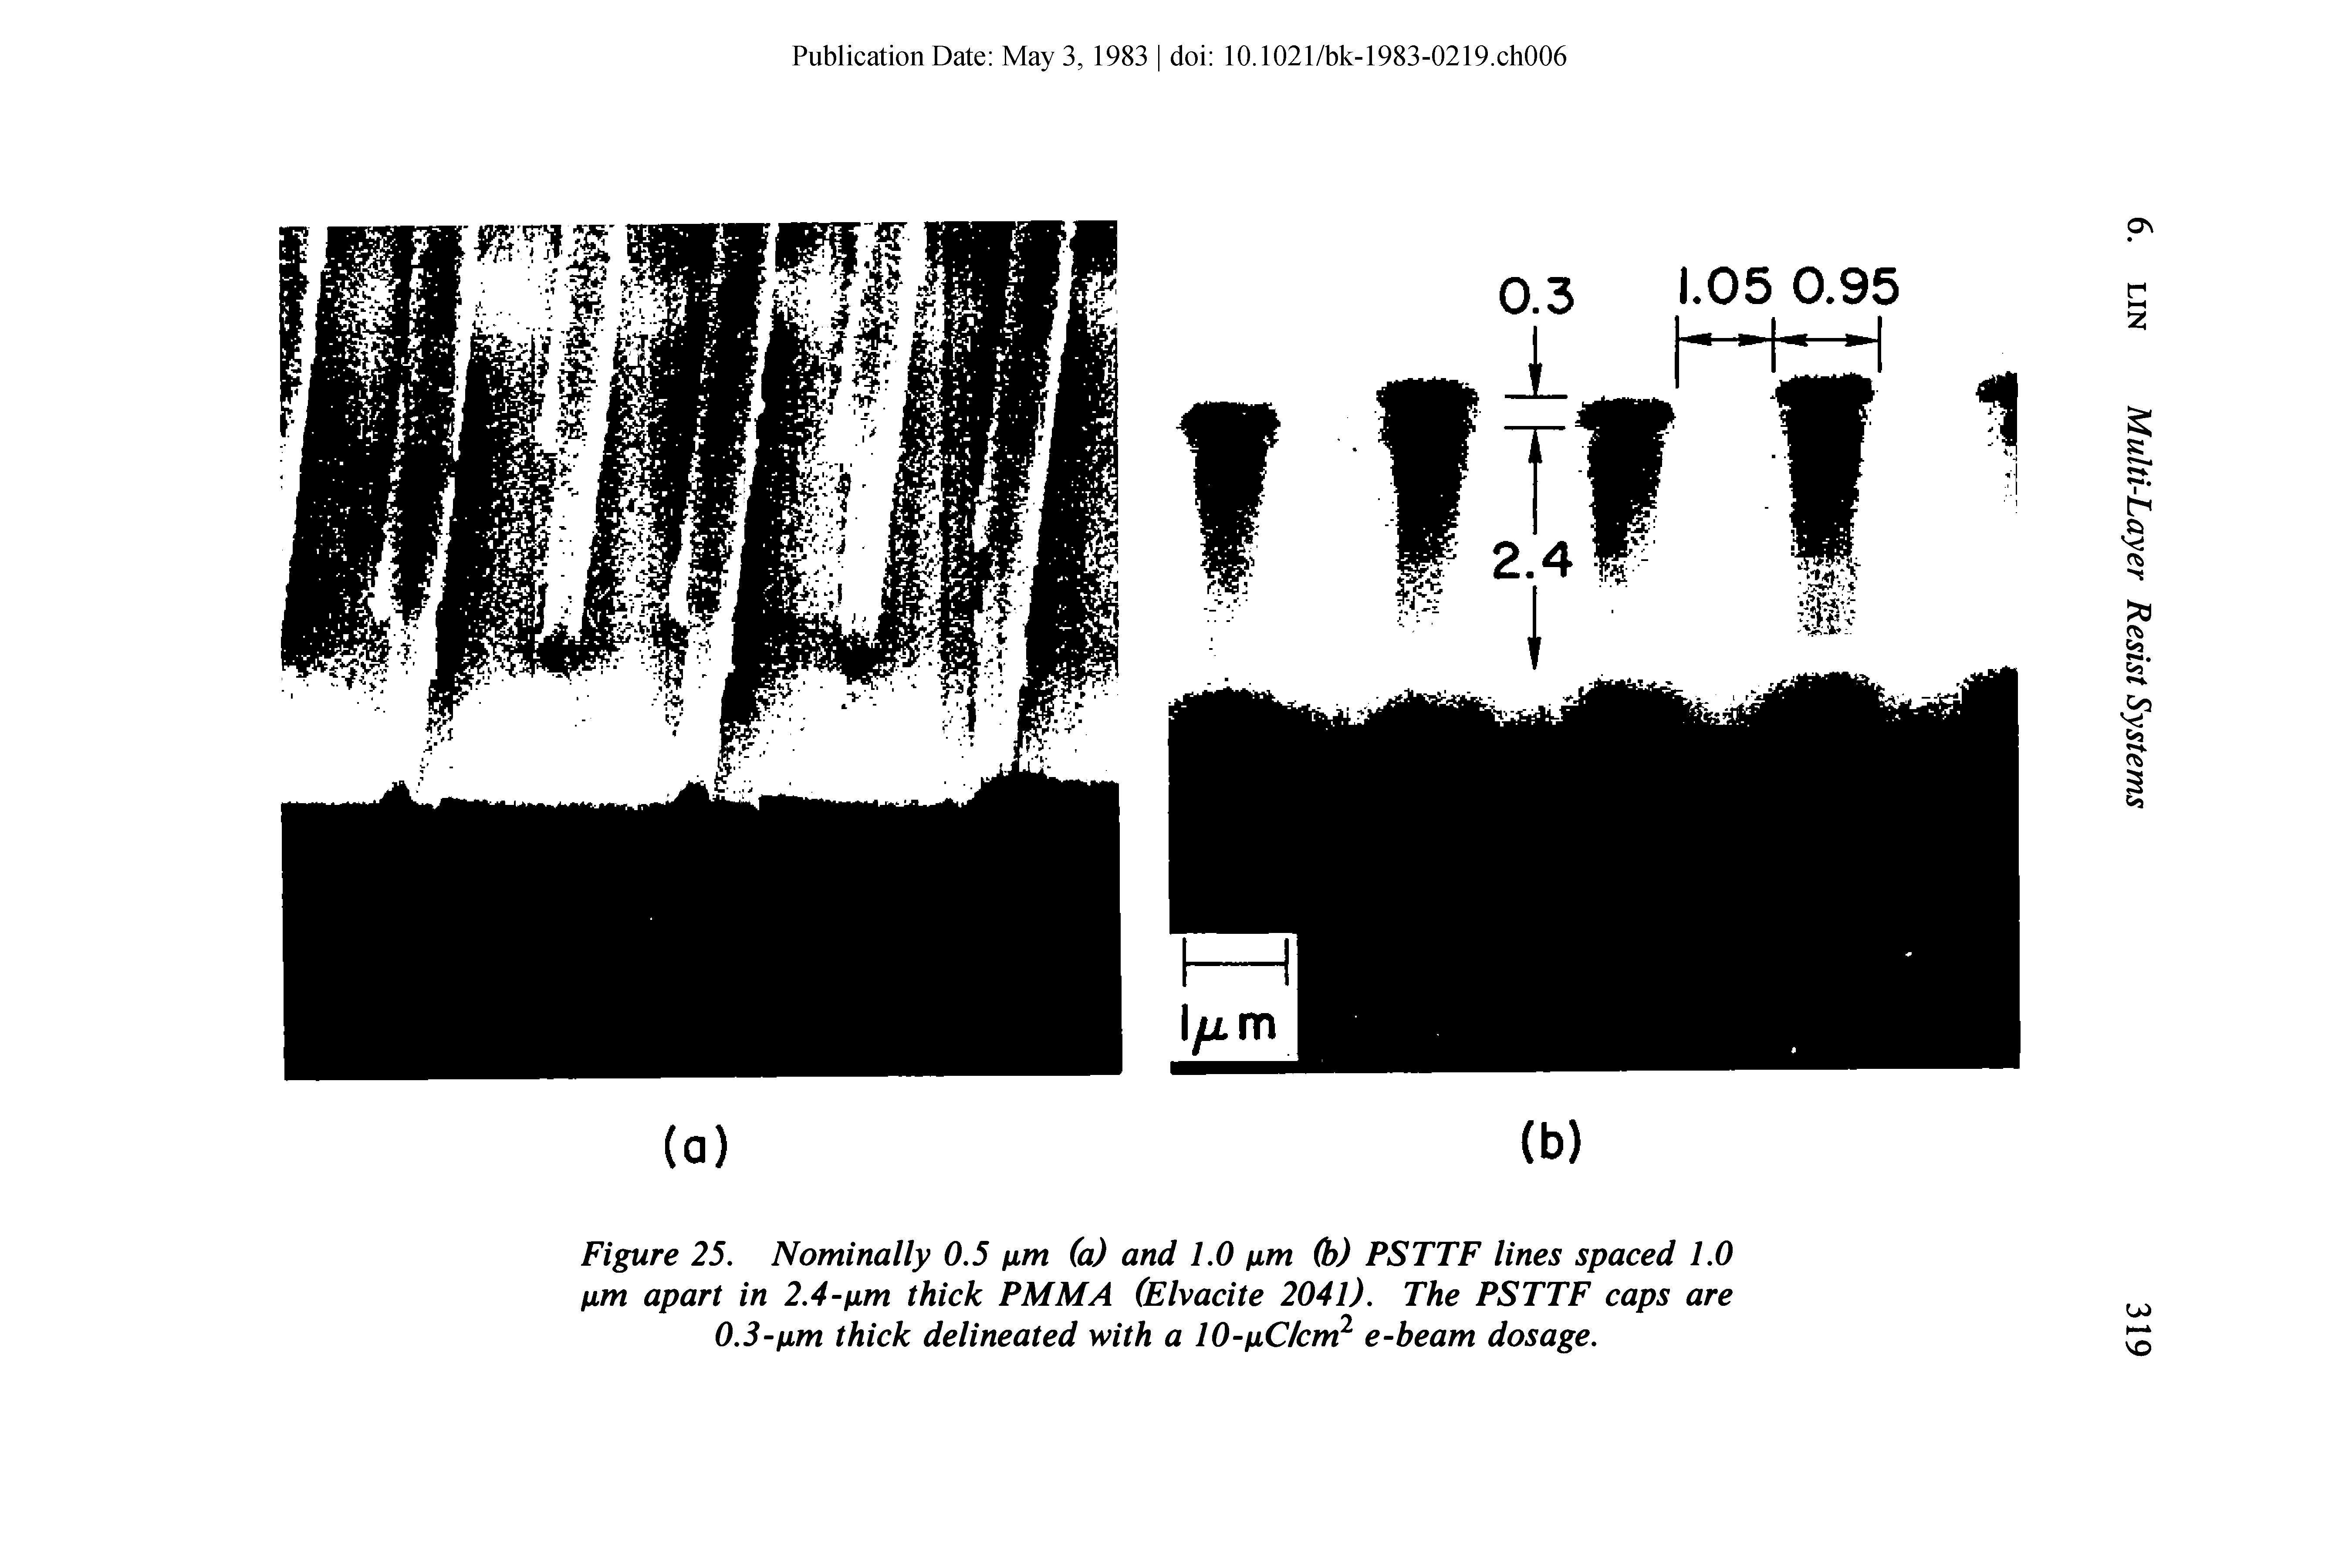 Figure 25. Nominally 0.5 um (a) and 1.0 ixm (b) PSTTF lines spaced 1.0 ixm apart in 2.4-ixm thick PMMA (Elvacite 2041). The PSTTF caps are 0.3-iim thick delineated with a 10-uClcm e-beam dosage.